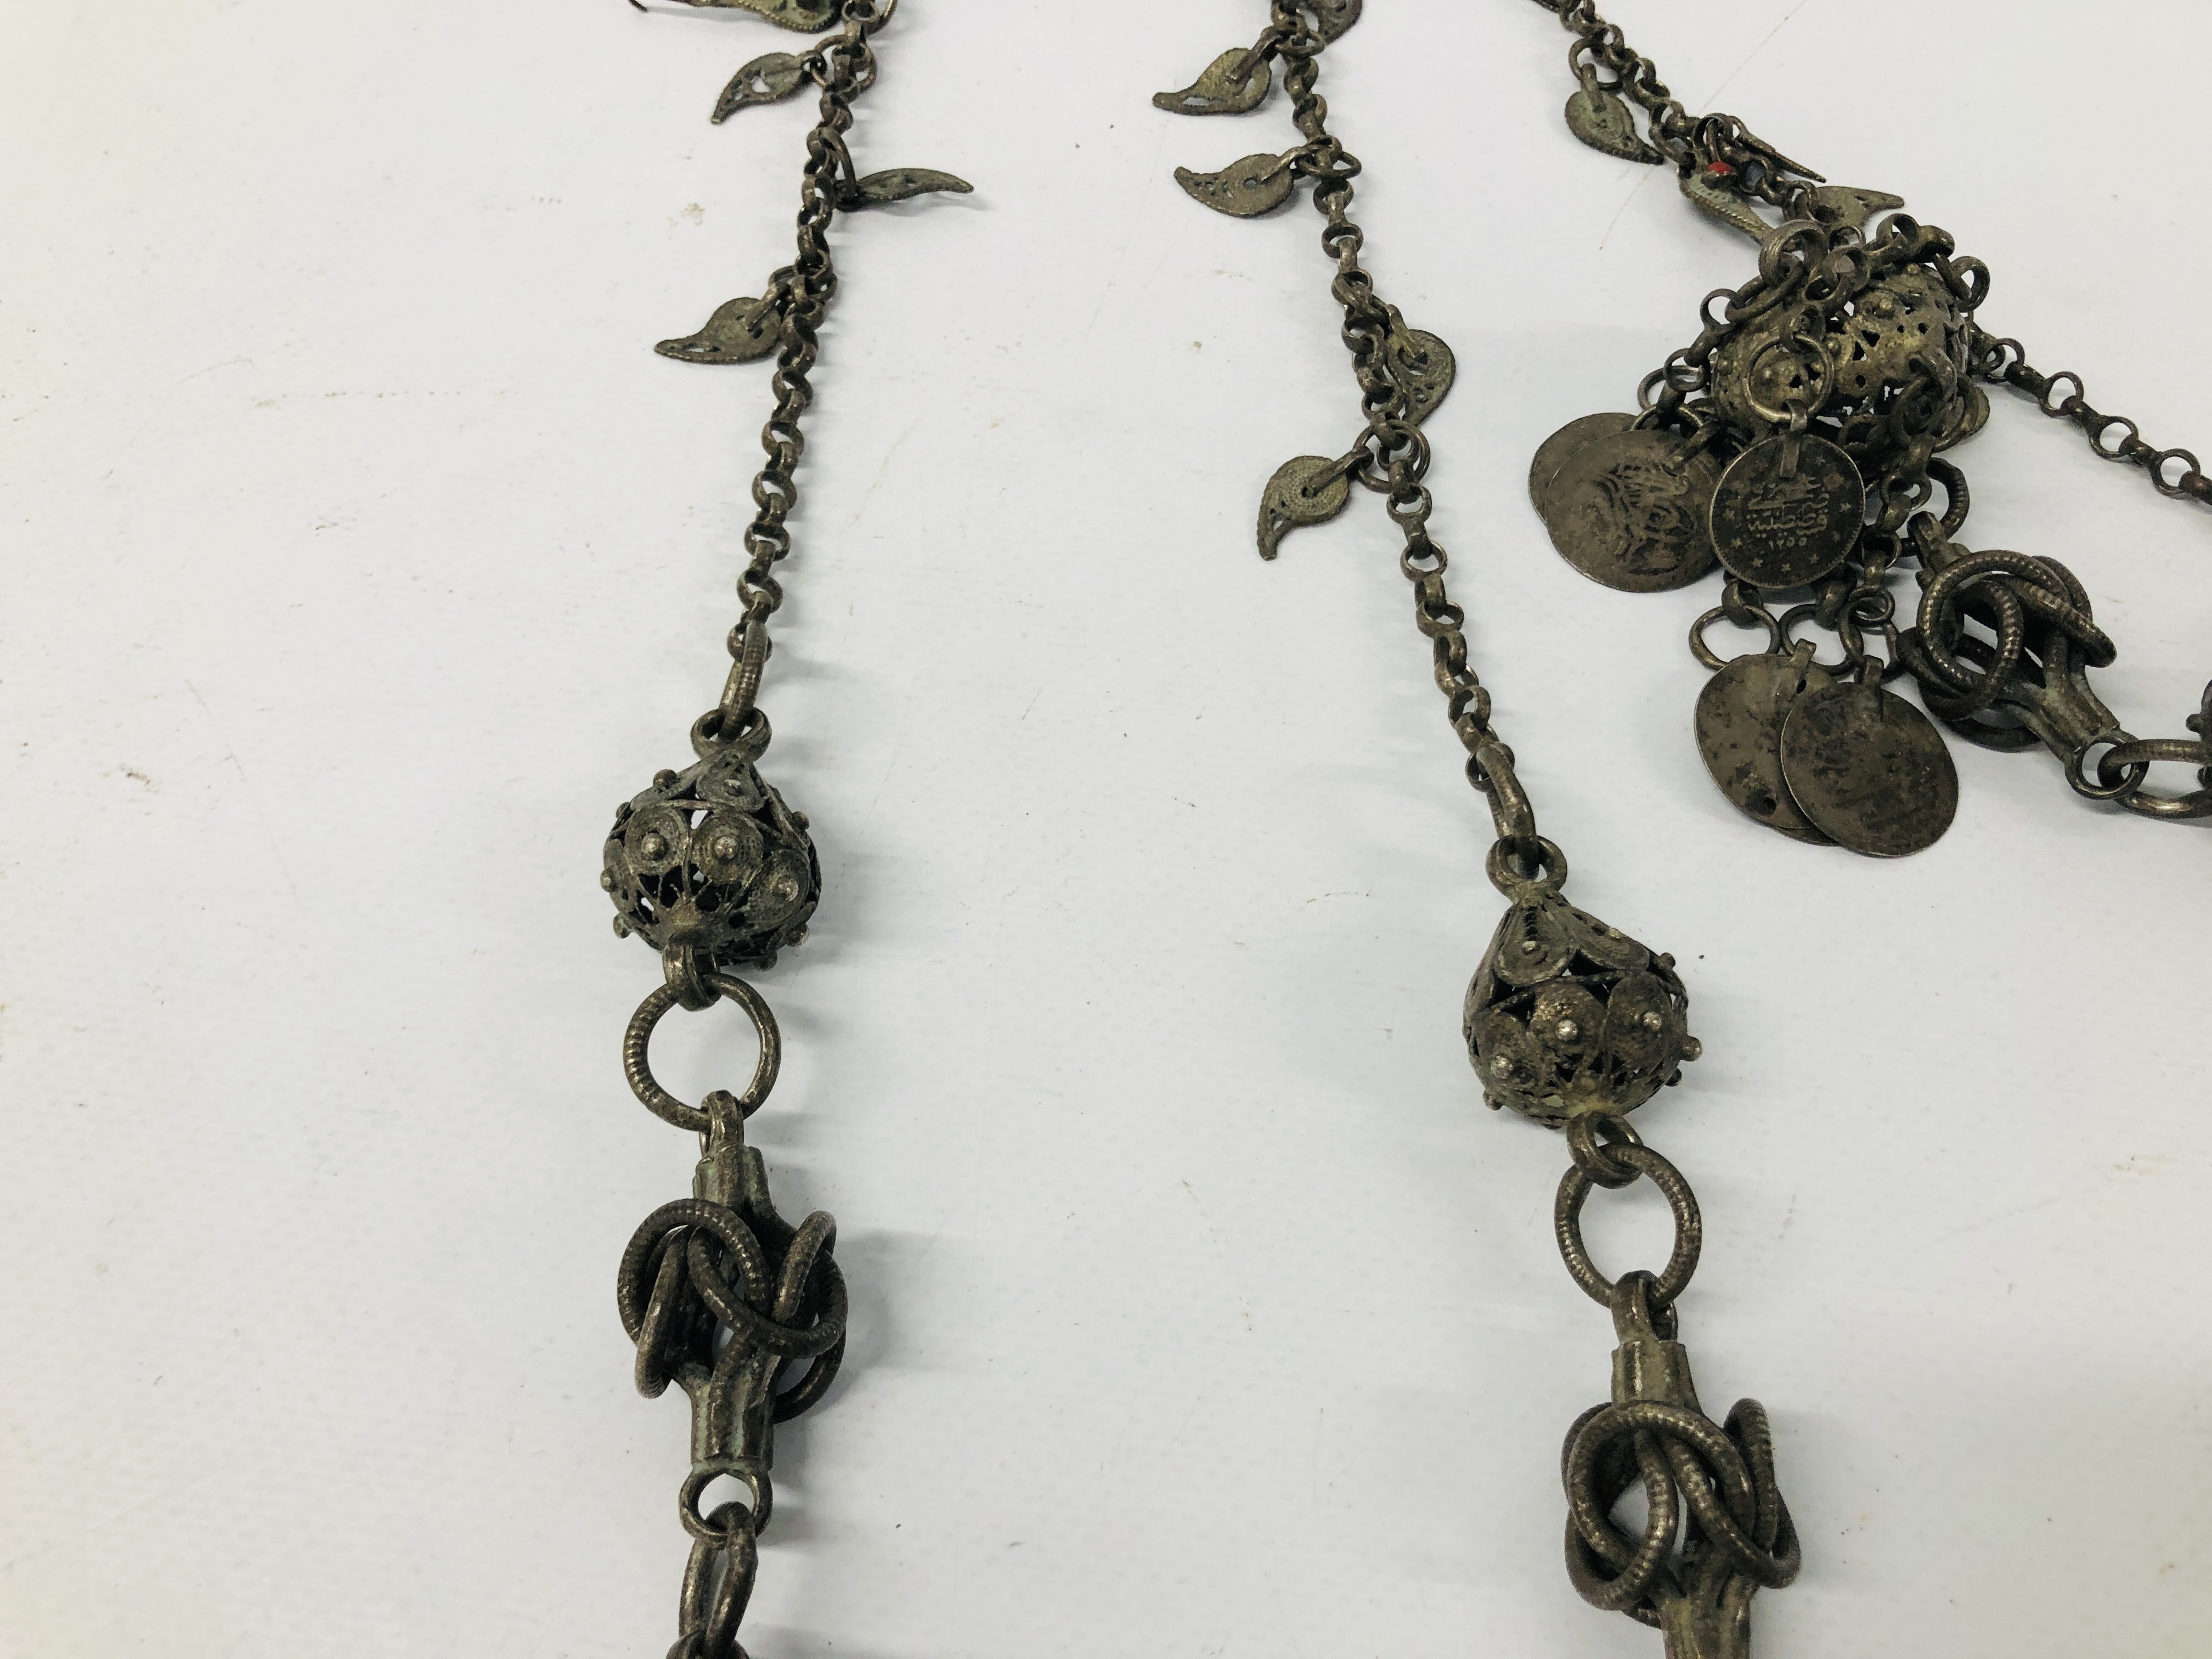 AN ANTIQUE PERSIAN DECORATIVE CHAIN WITH COIN TASSELS. - Image 4 of 6